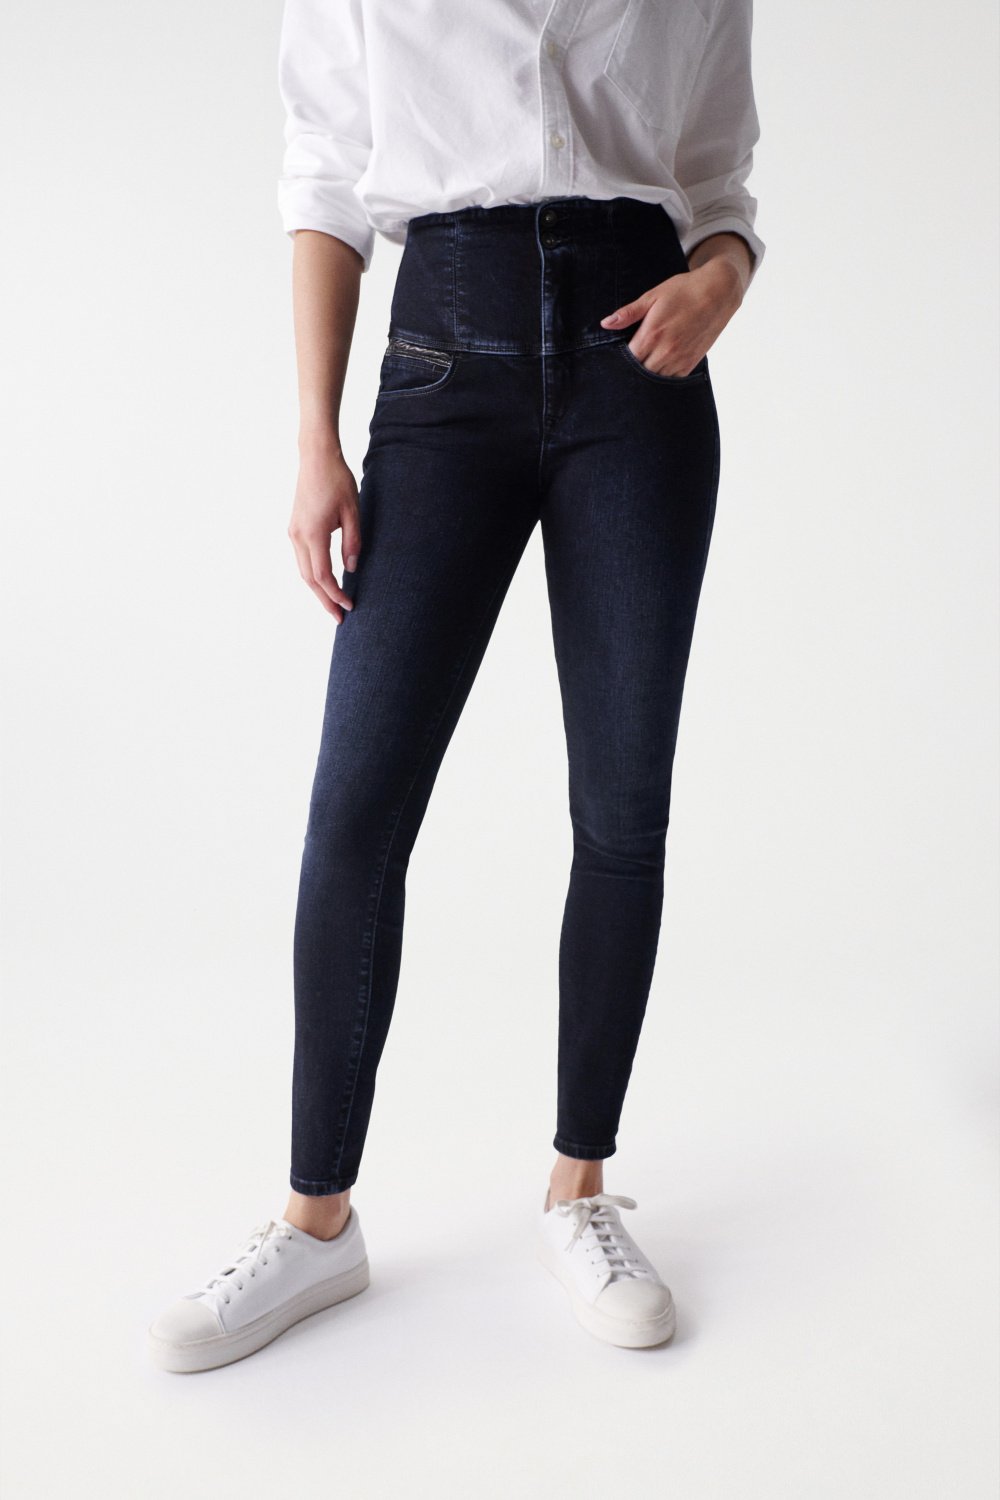 Diva jeans with Nappa details on the pockets - Salsa